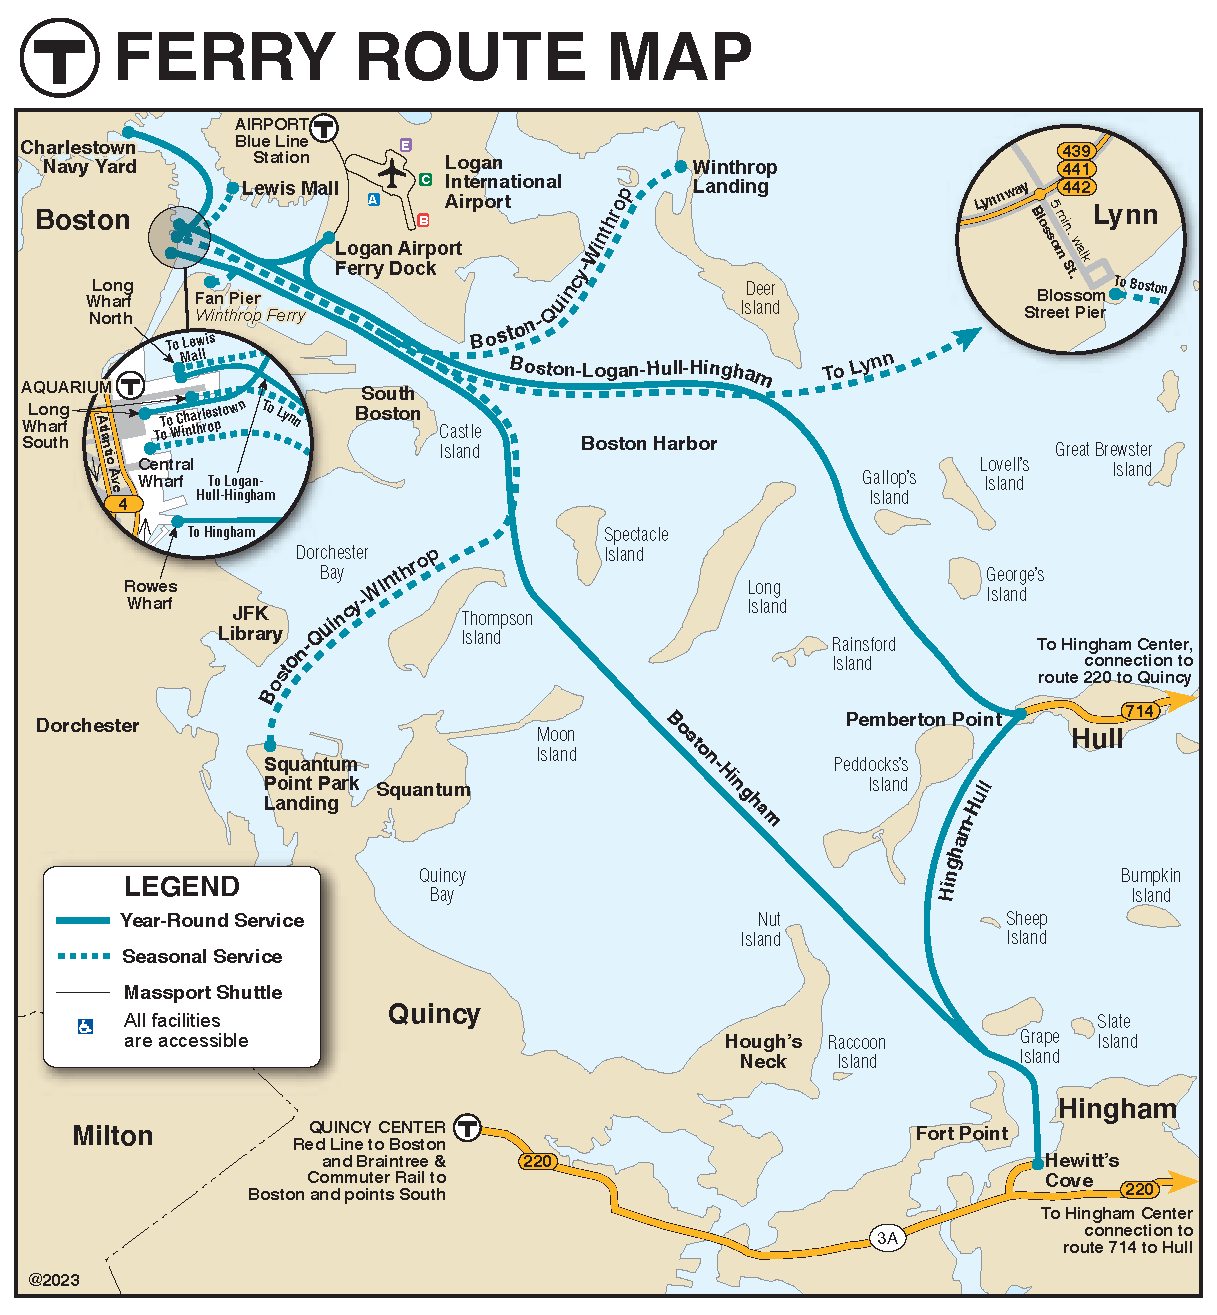 Harbor map showing both seasonal and year-round ferry routes